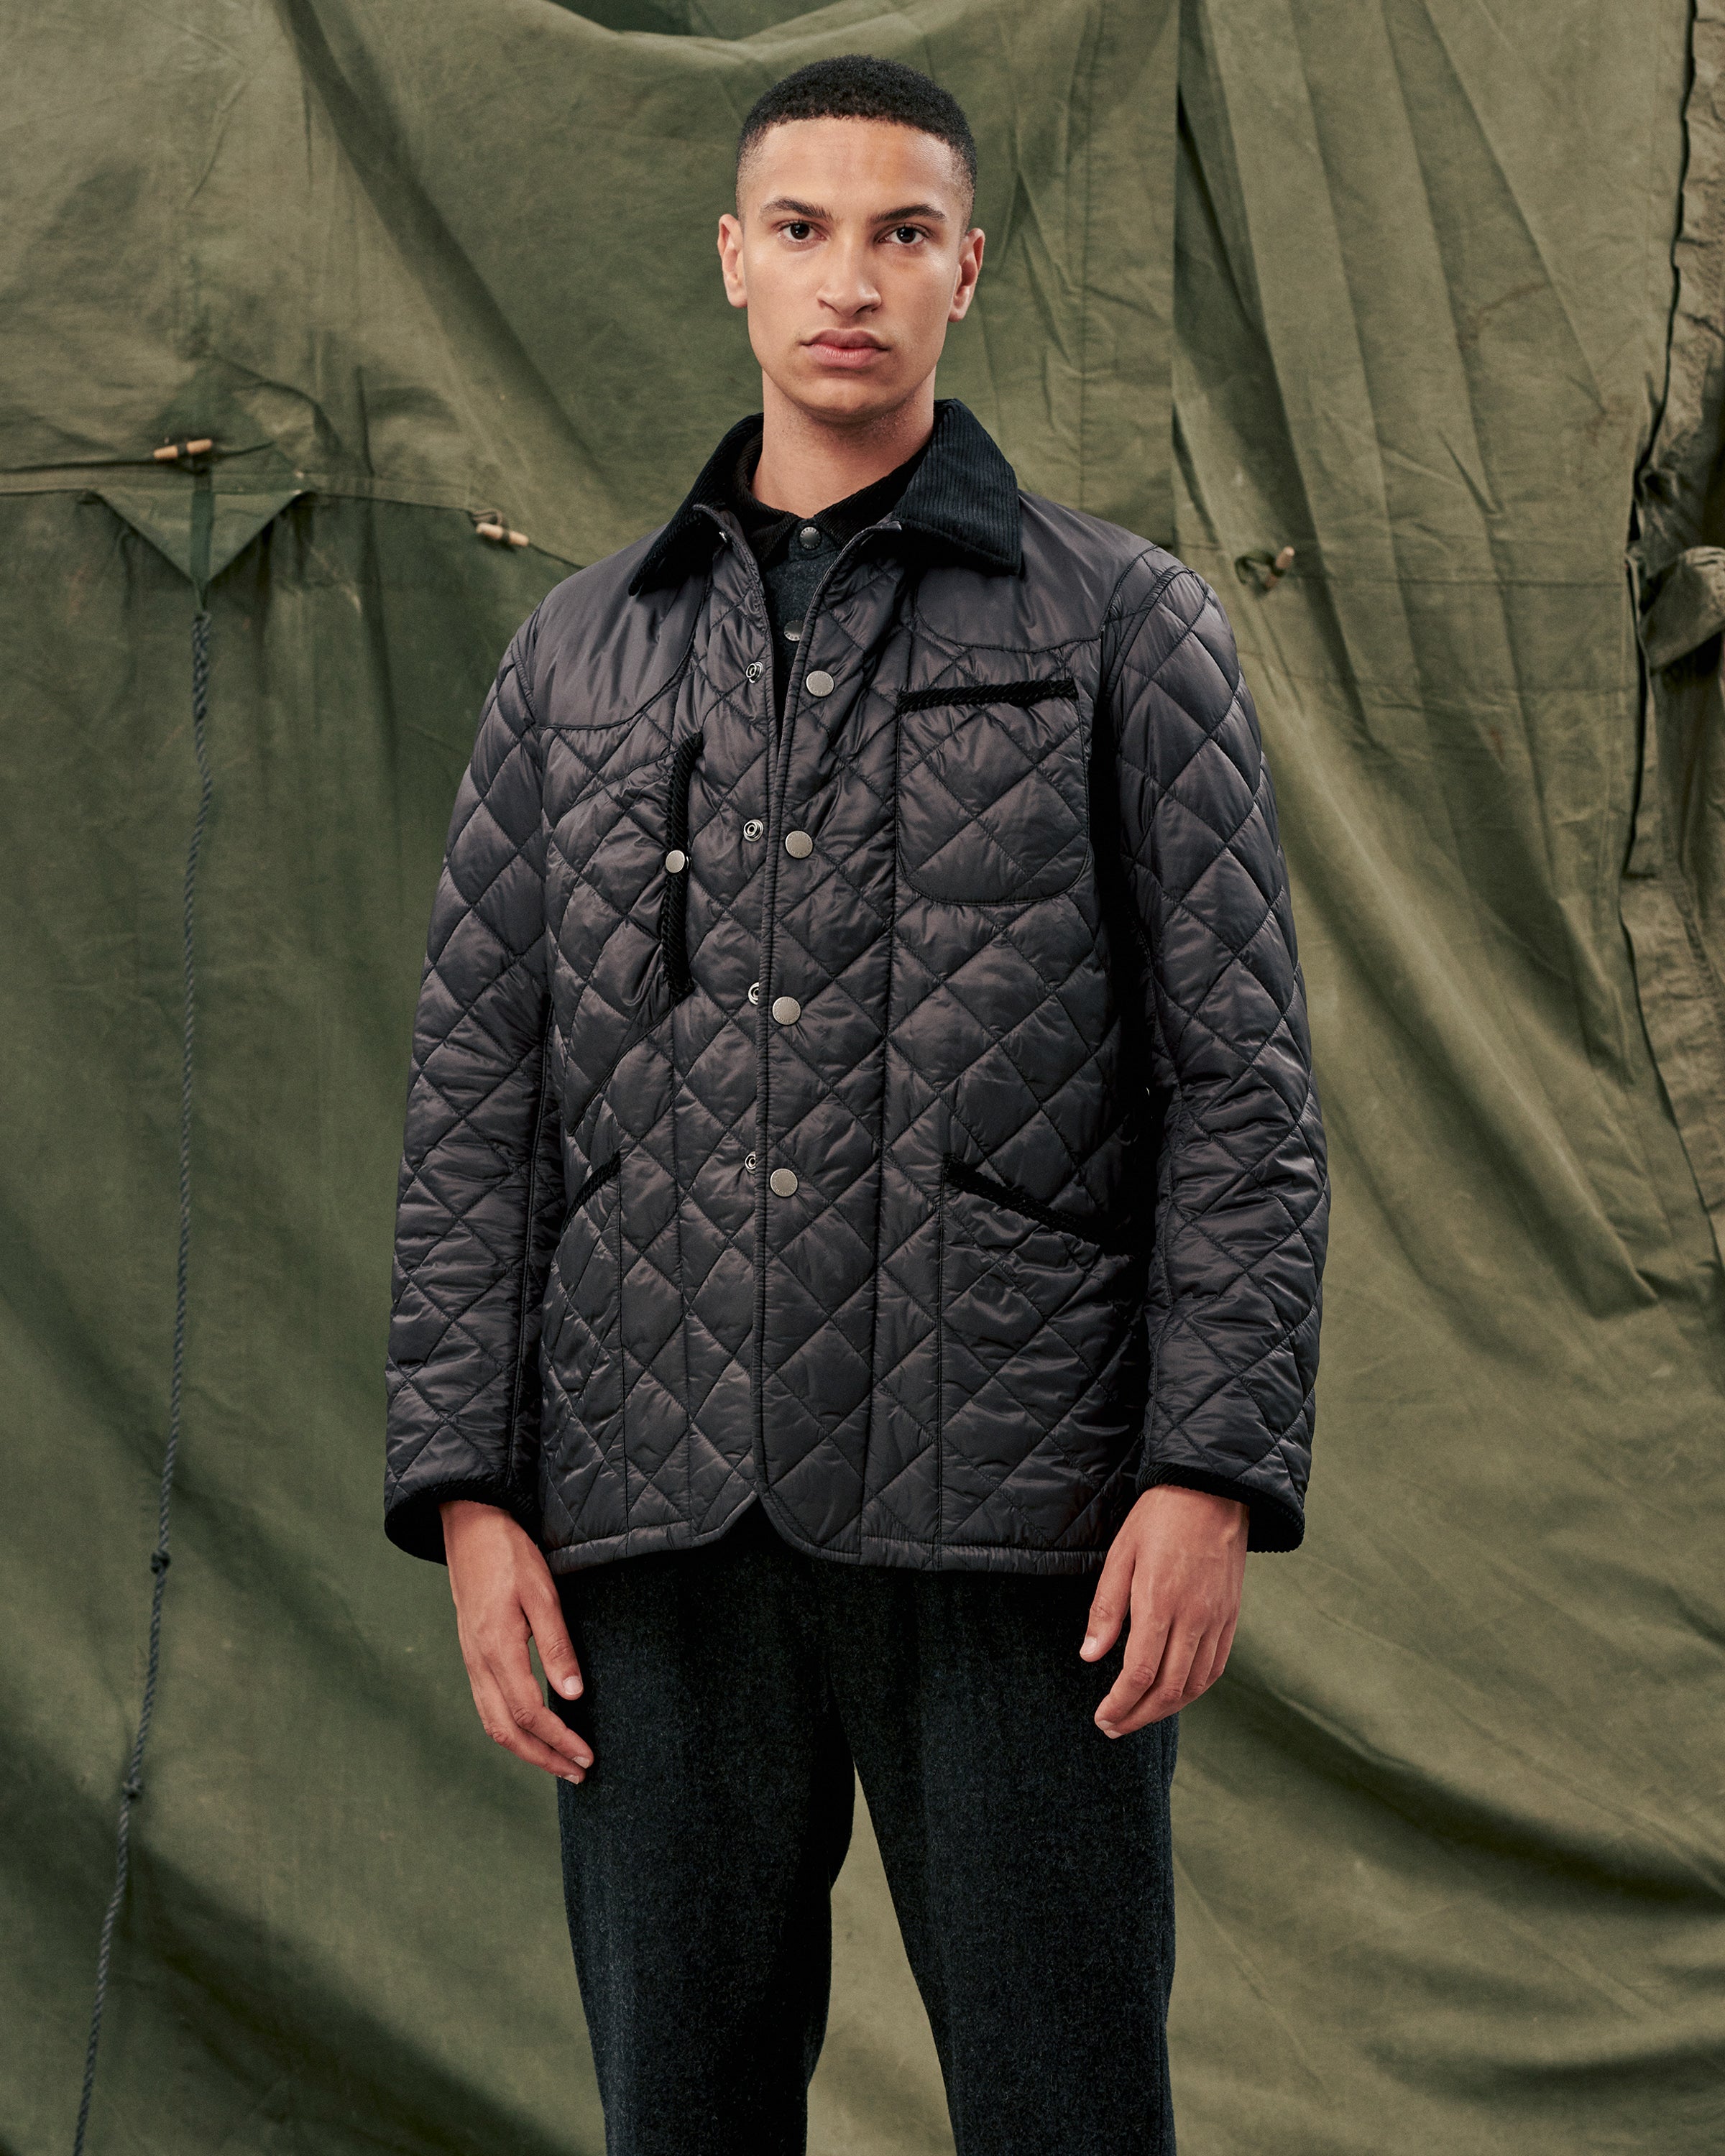 「SPECIAL RELEASE」EG X BARBOUR QUILTING COLLECTION - RELEASING AUGUST 23RD